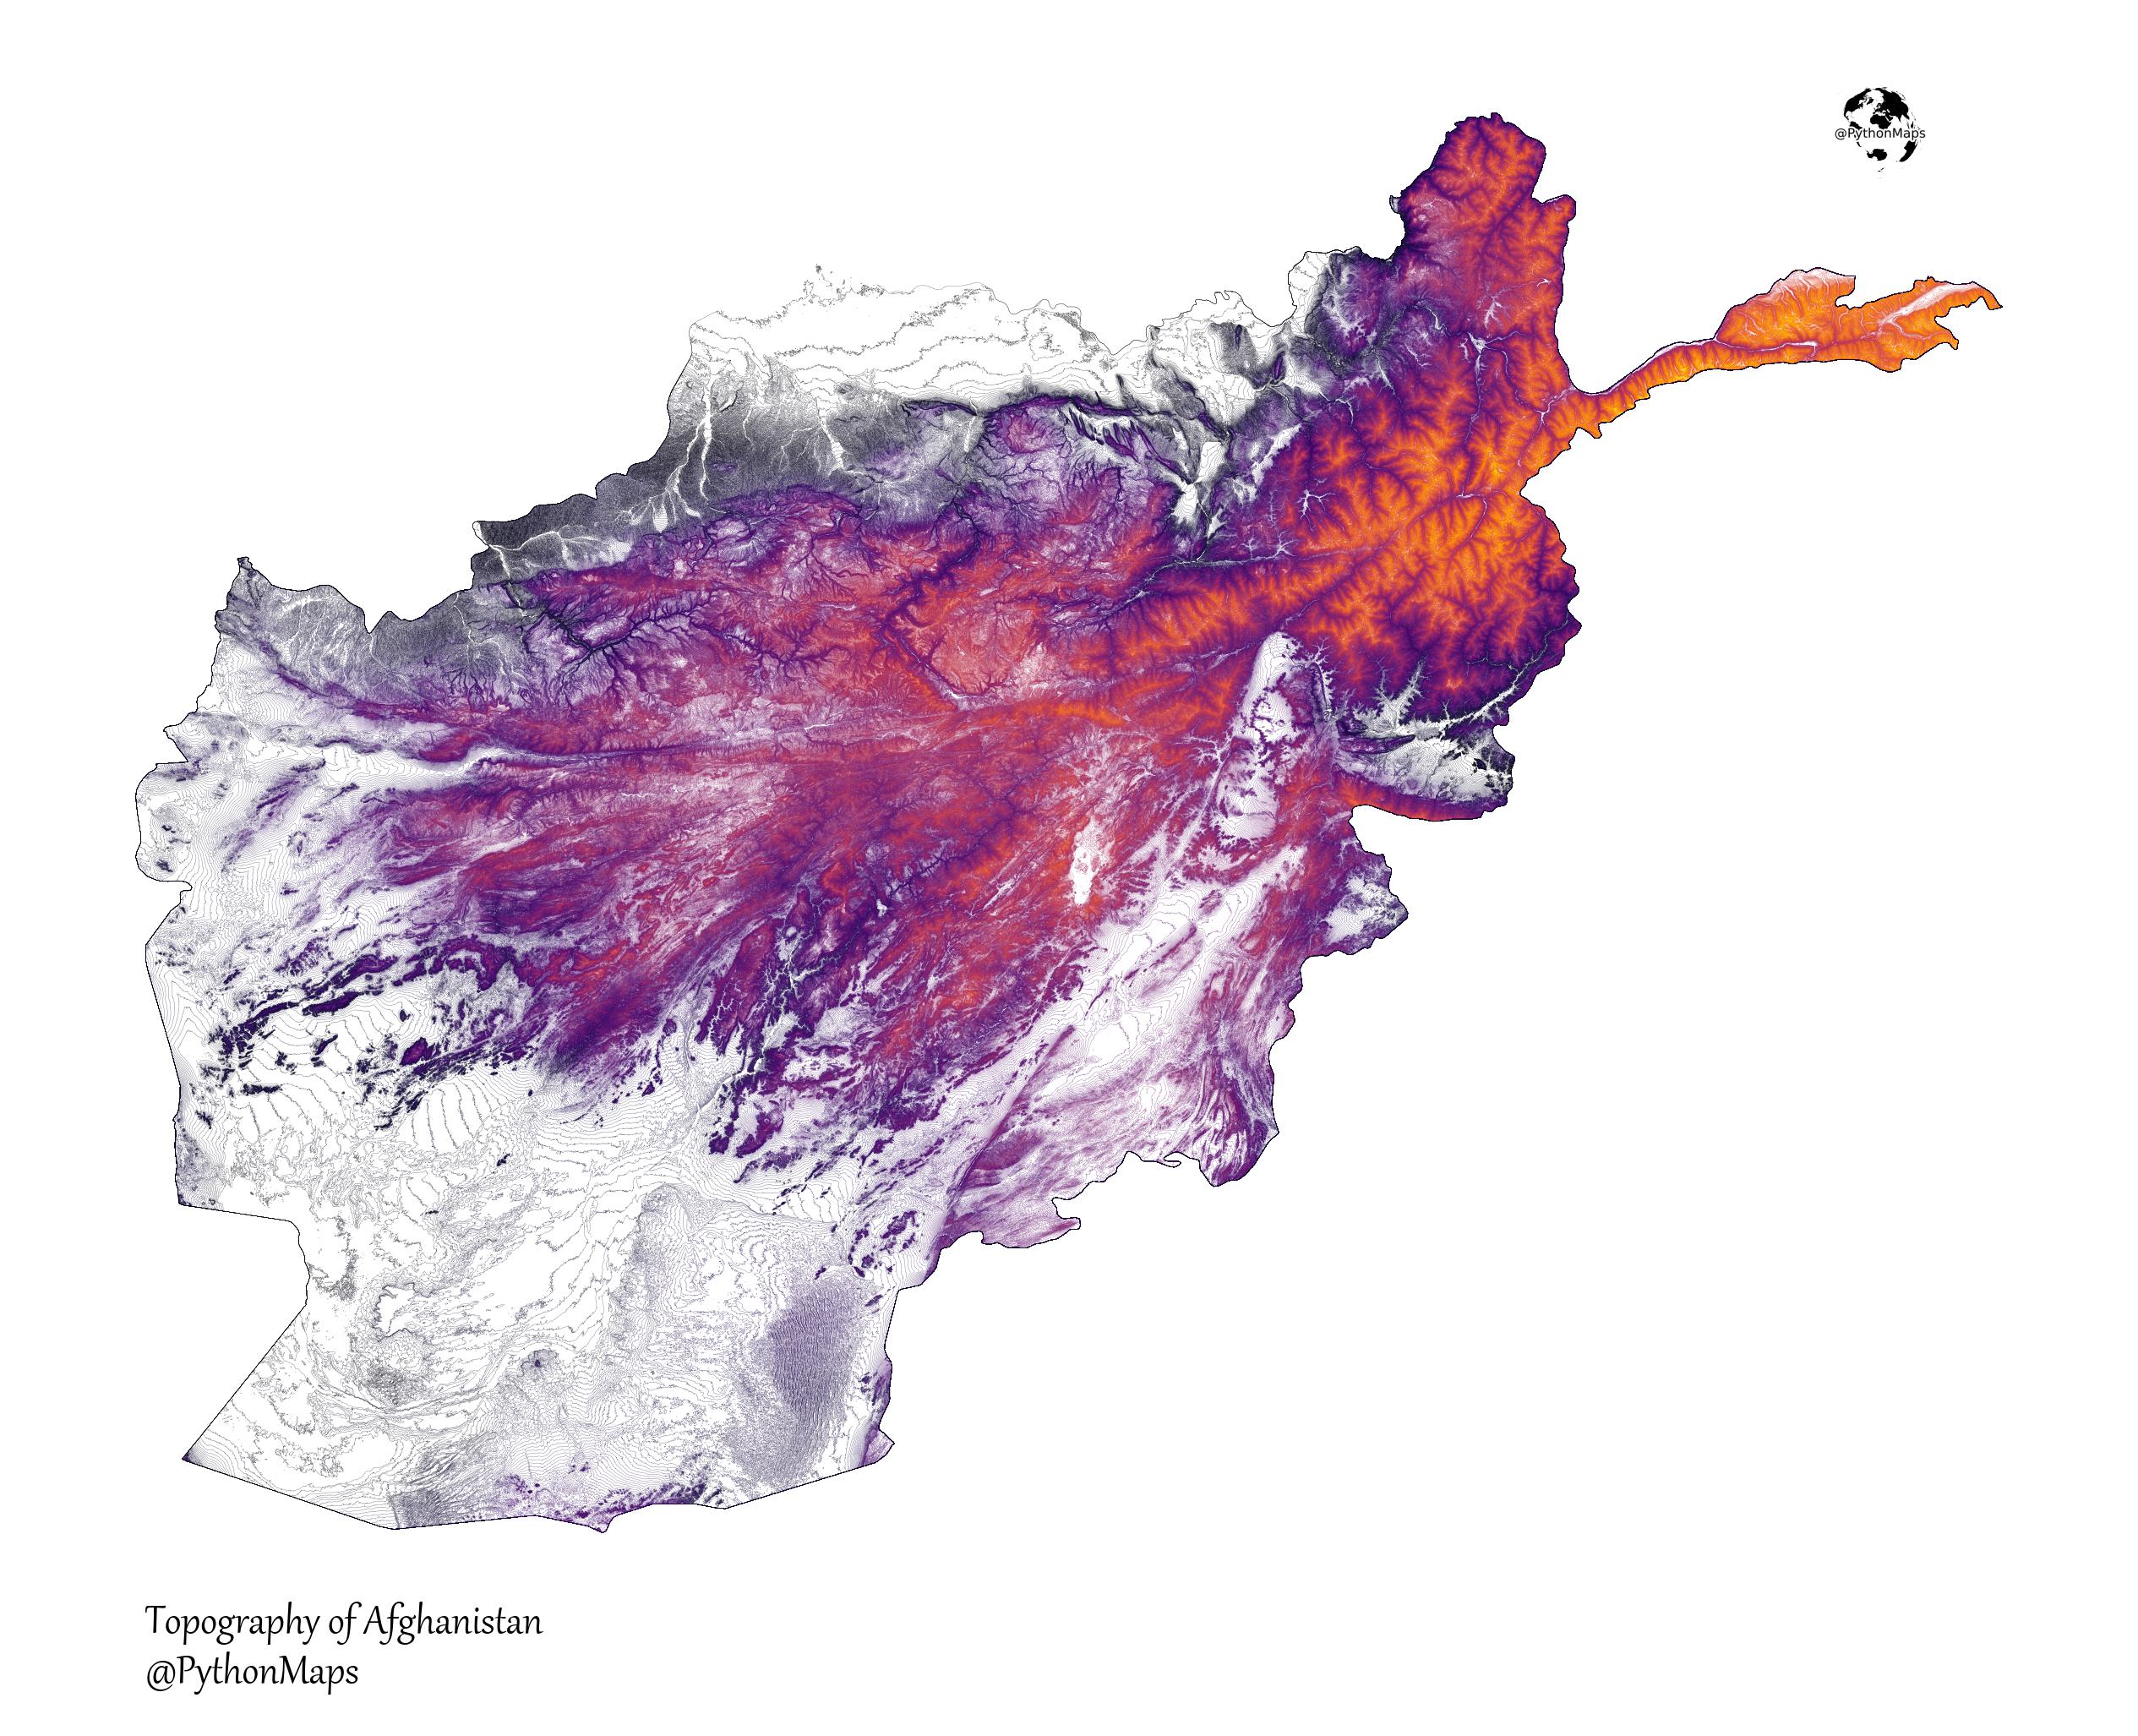 The Topography of Afghanistan